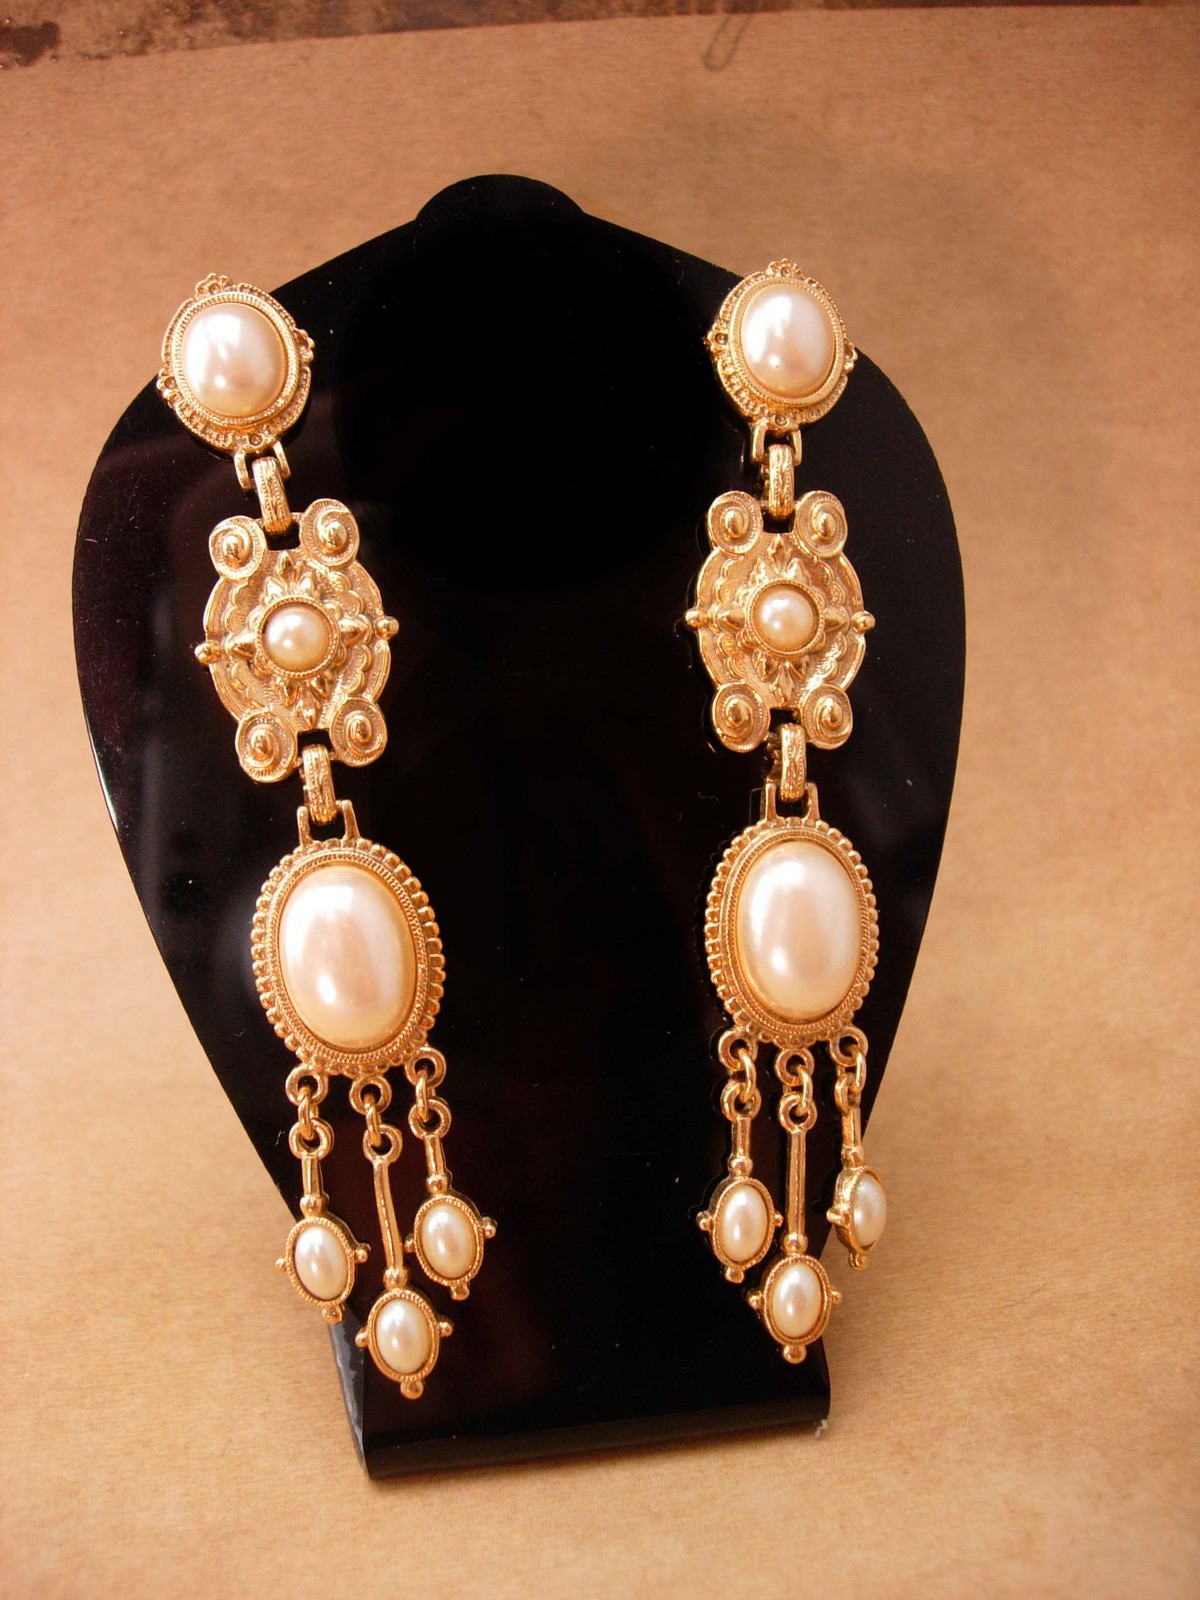 Primary image for Vintage 1928 Earrings - long edwardian style faux pearl drops - wedding chandeli